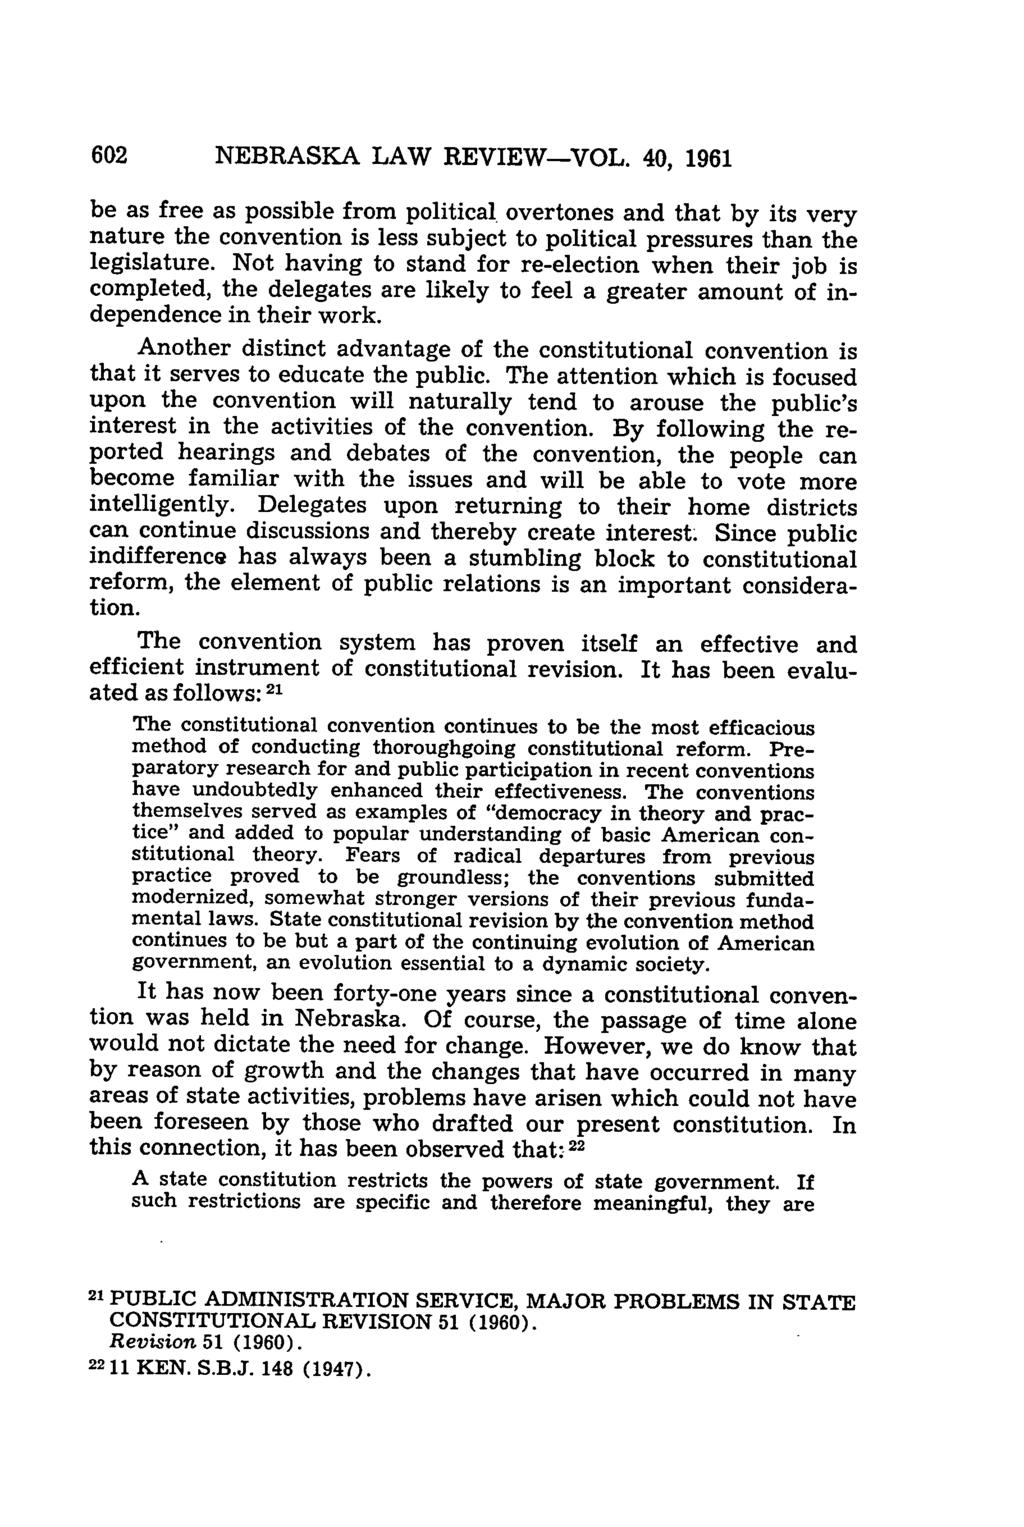 NEBRASKA LAW REVIEW-VOL. 40, 1961 be as free as possible from political overtones and that by its very nature the convention is less subject to political pressures than the legislature.